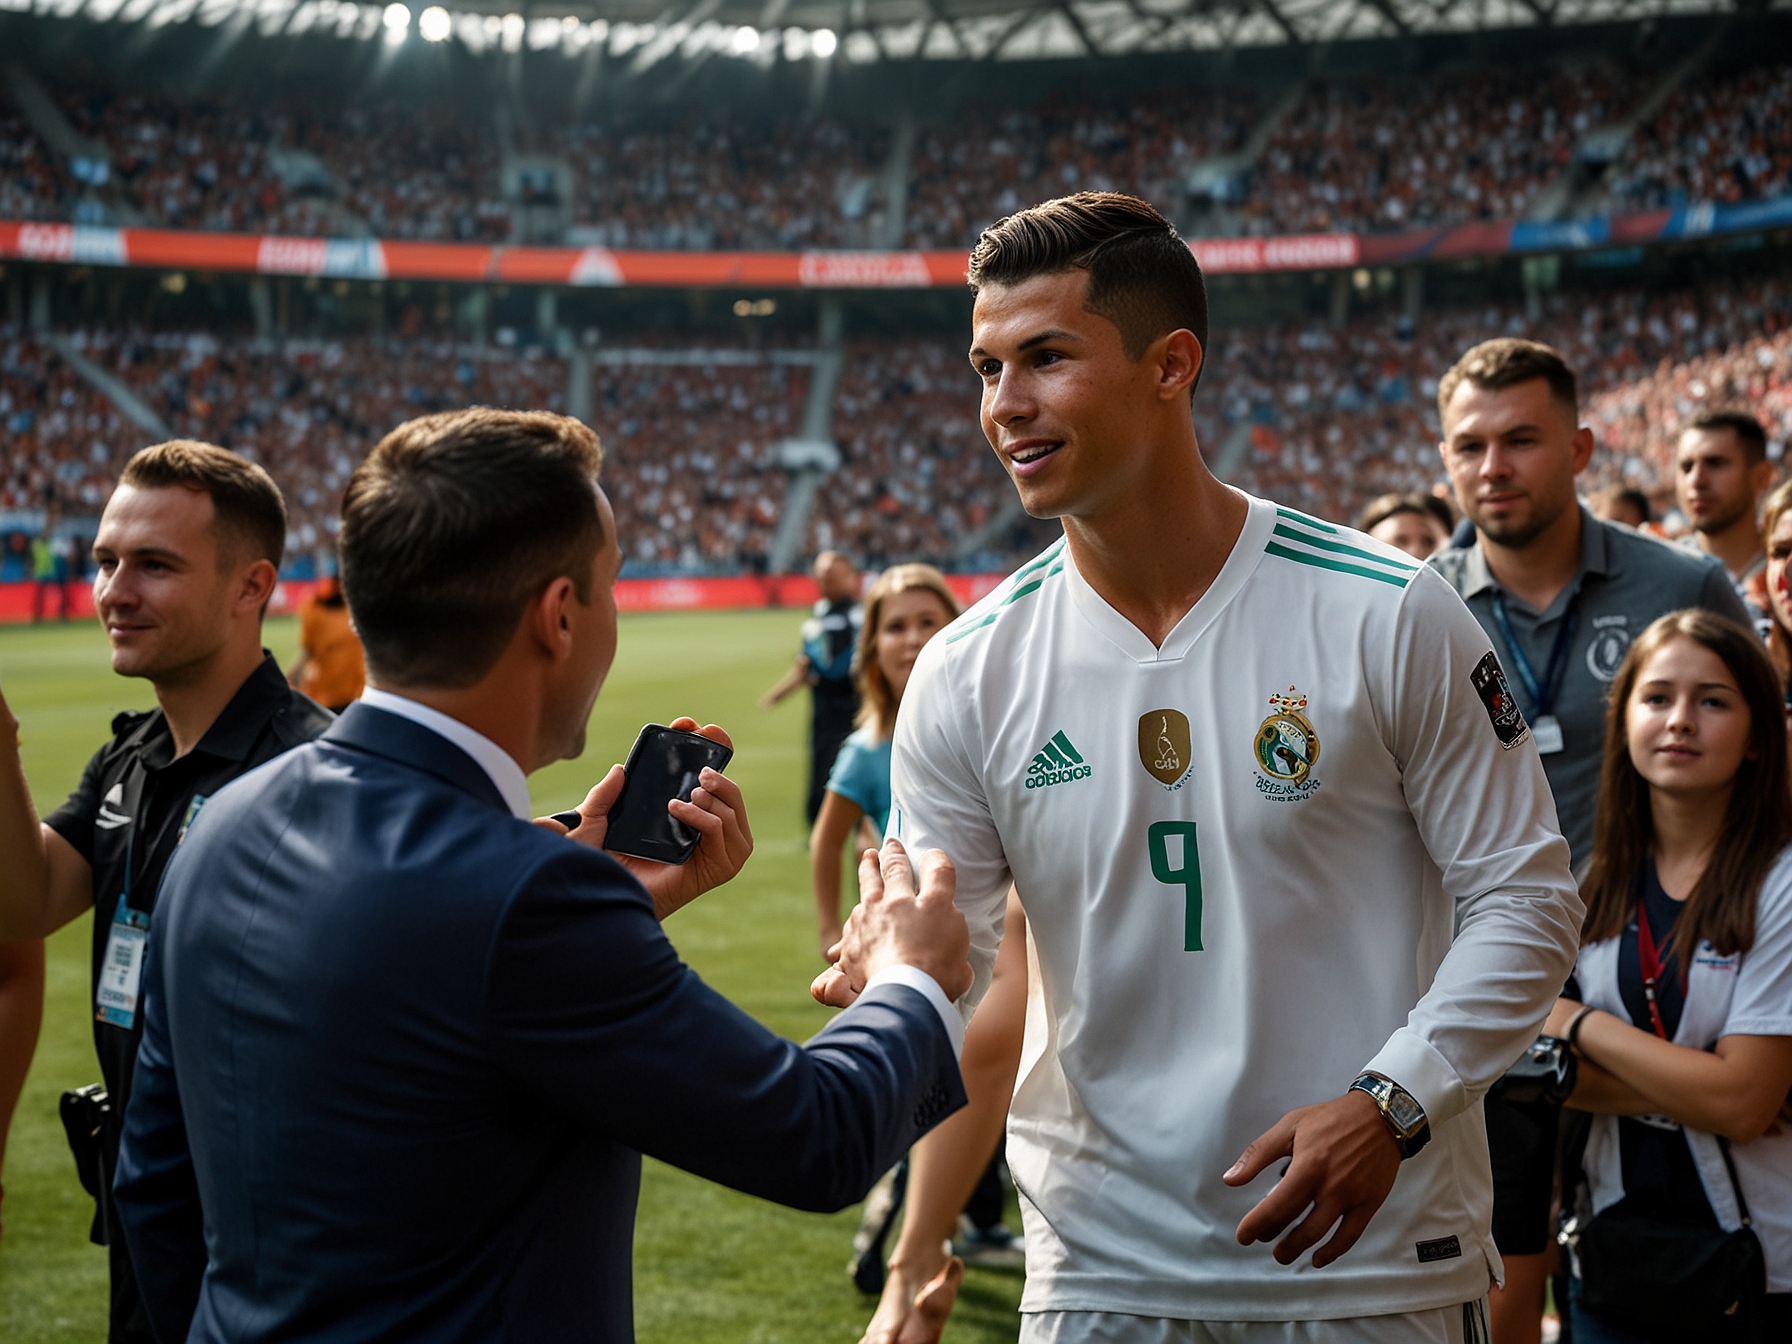 Cristiano Ronaldo poses briefly with a young fan who takes a selfie during the second half of the Euro 2024 match, as security personnel approach to escort the fan off the field.